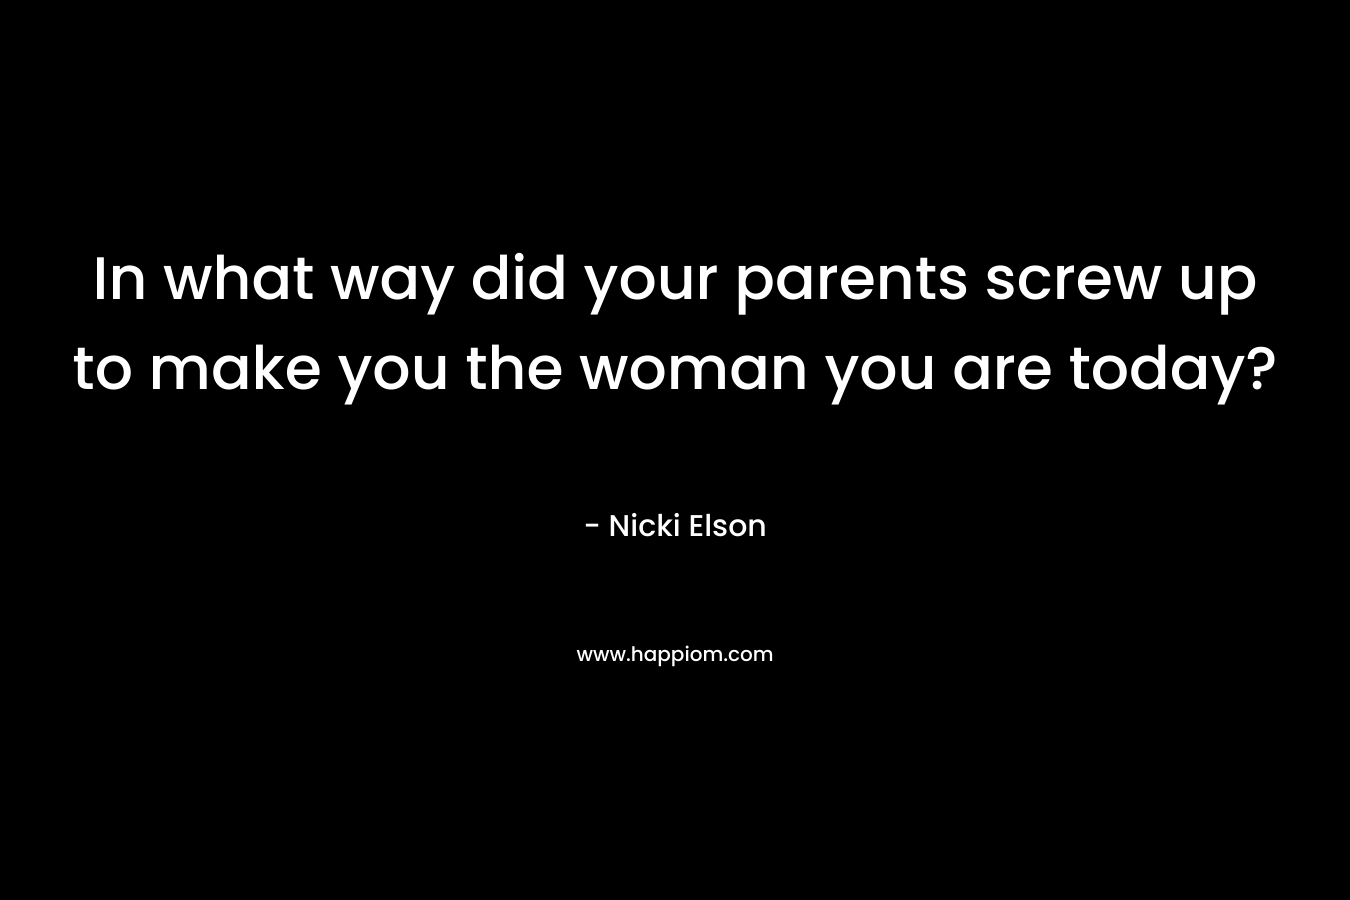 In what way did your parents screw up to make you the woman you are today?